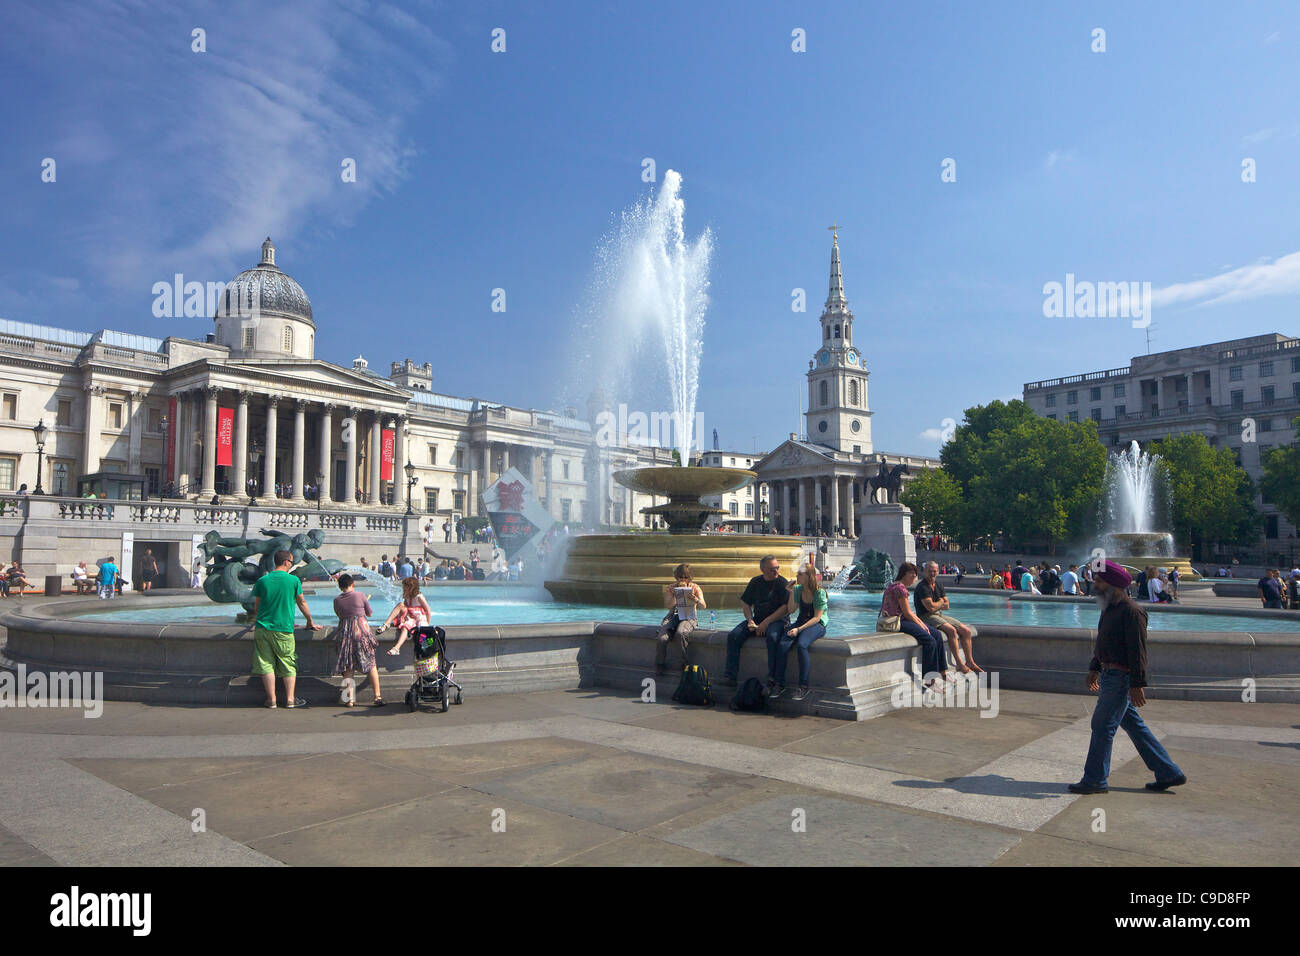 Fountains, National Gallery and St Martins-in-the-Fields church in Trafalgar Square, summer sunshine, London,  England, UK, Unit Stock Photo